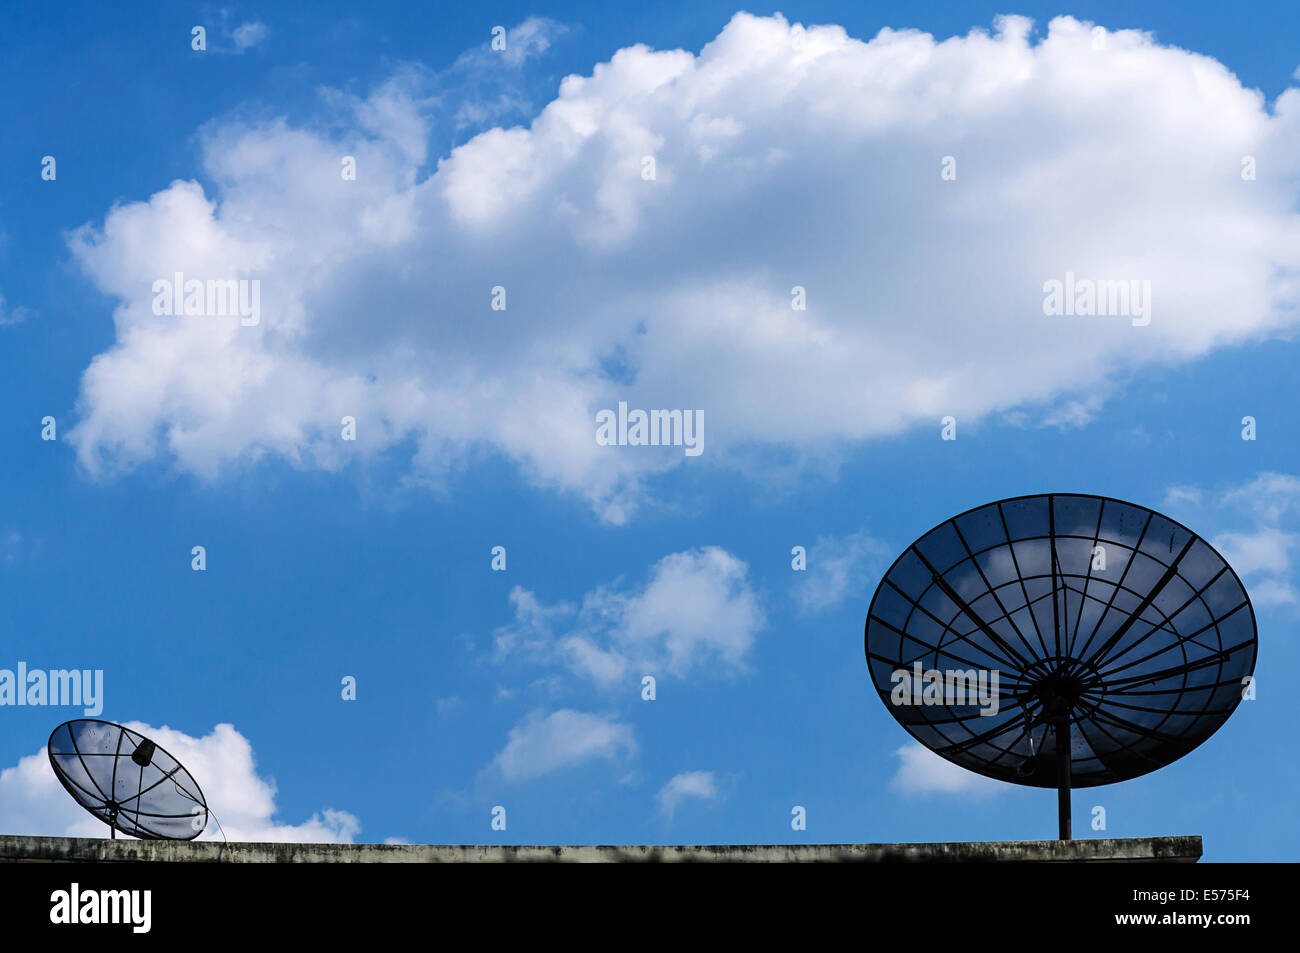 Satellite dish antenna on blue sky with cloud Stock Photo